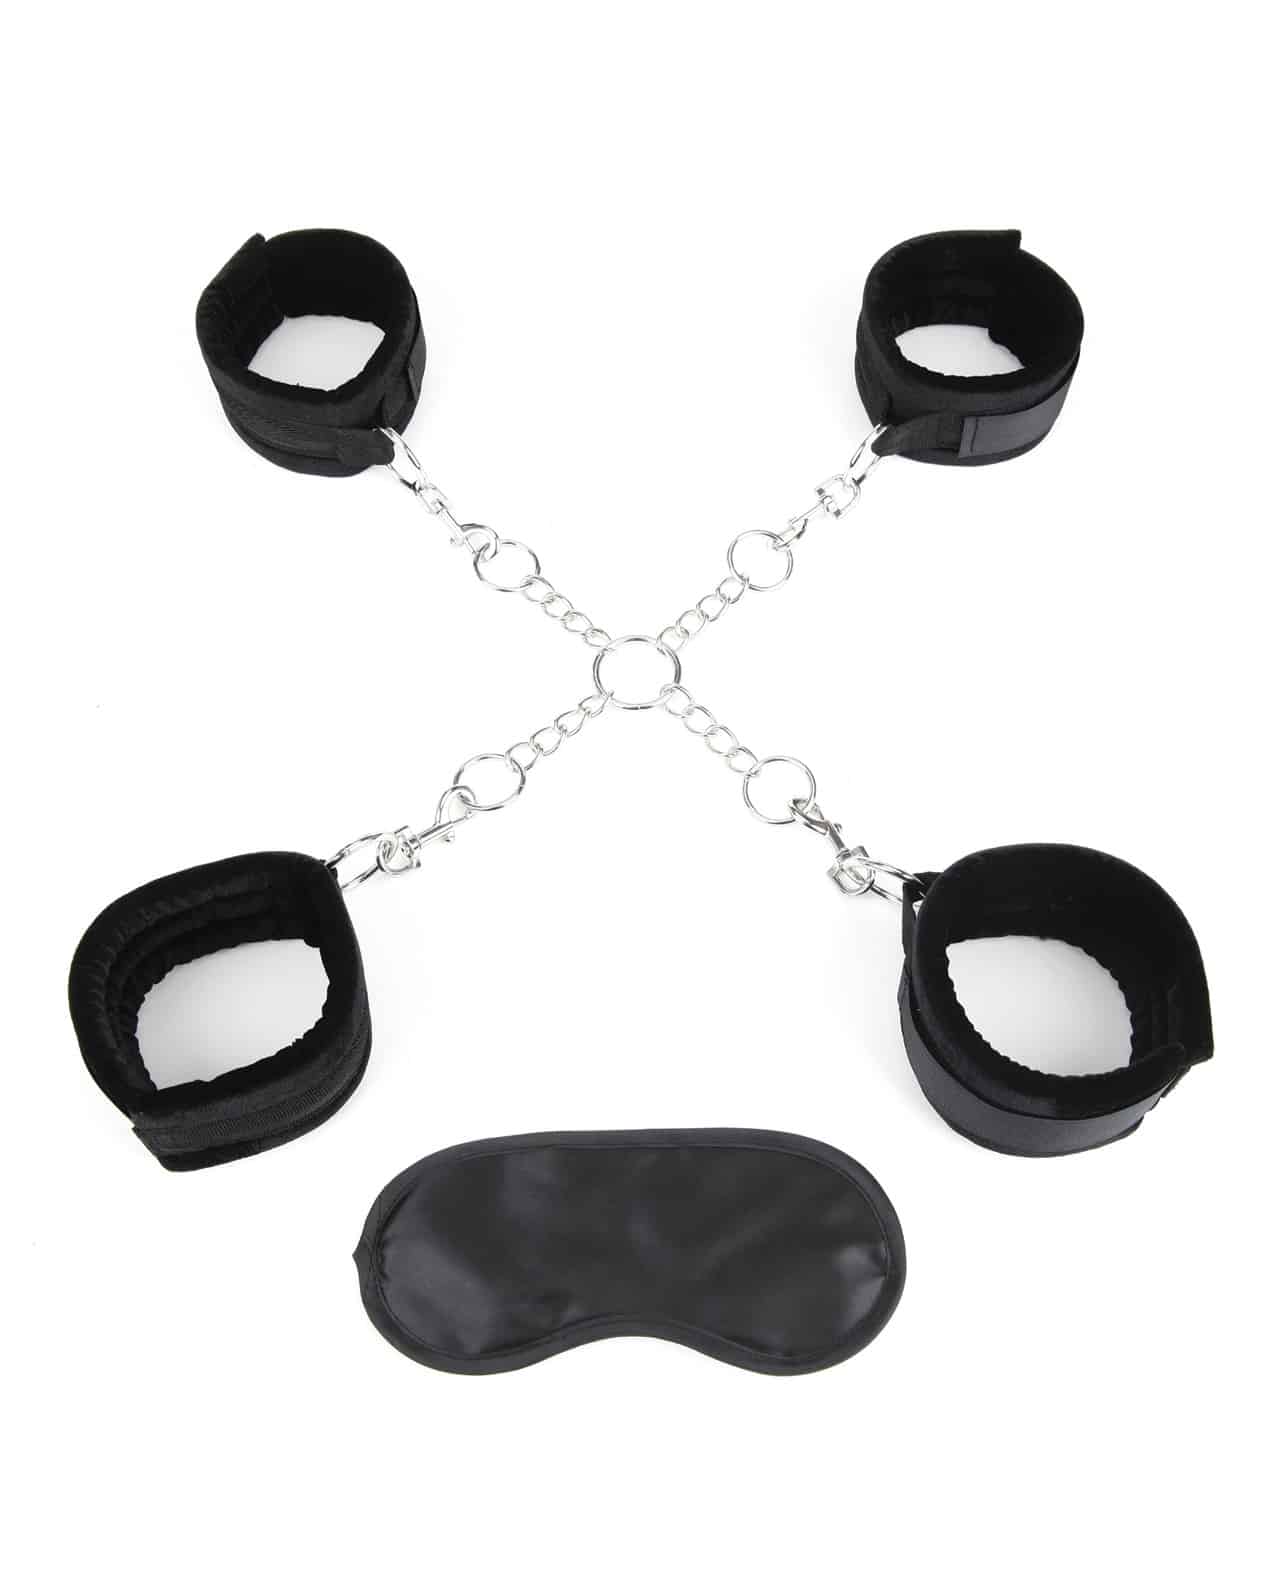 Lux Fetish Deluxe Chain Hogtie with 4 Universal Soft Restraint Cuffs